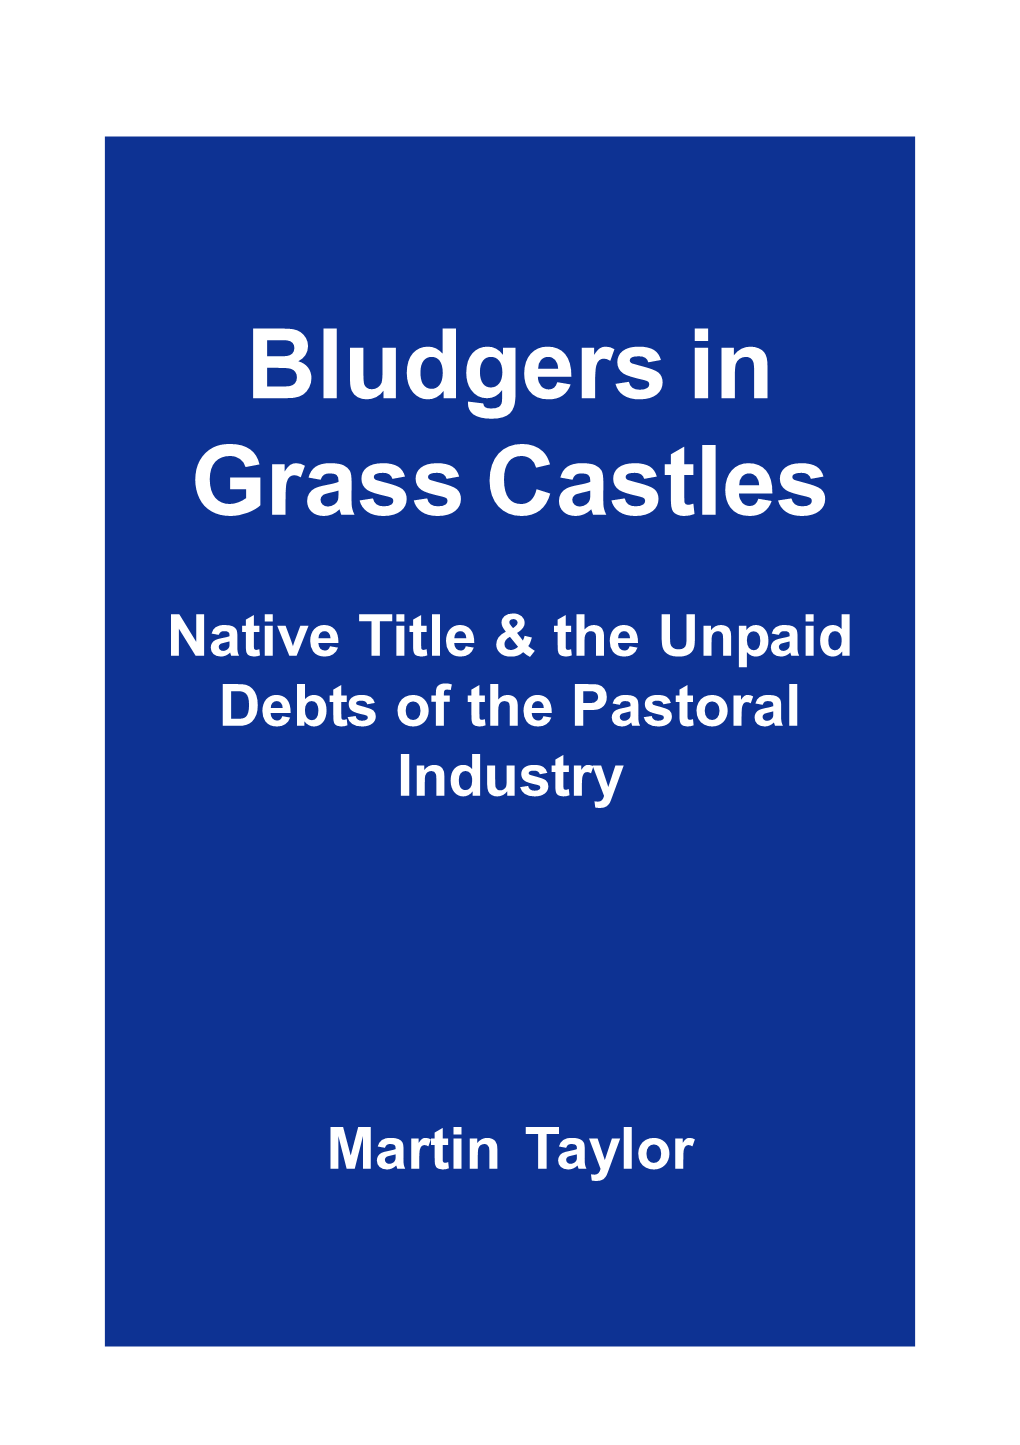 Bludgers in Grass Castles